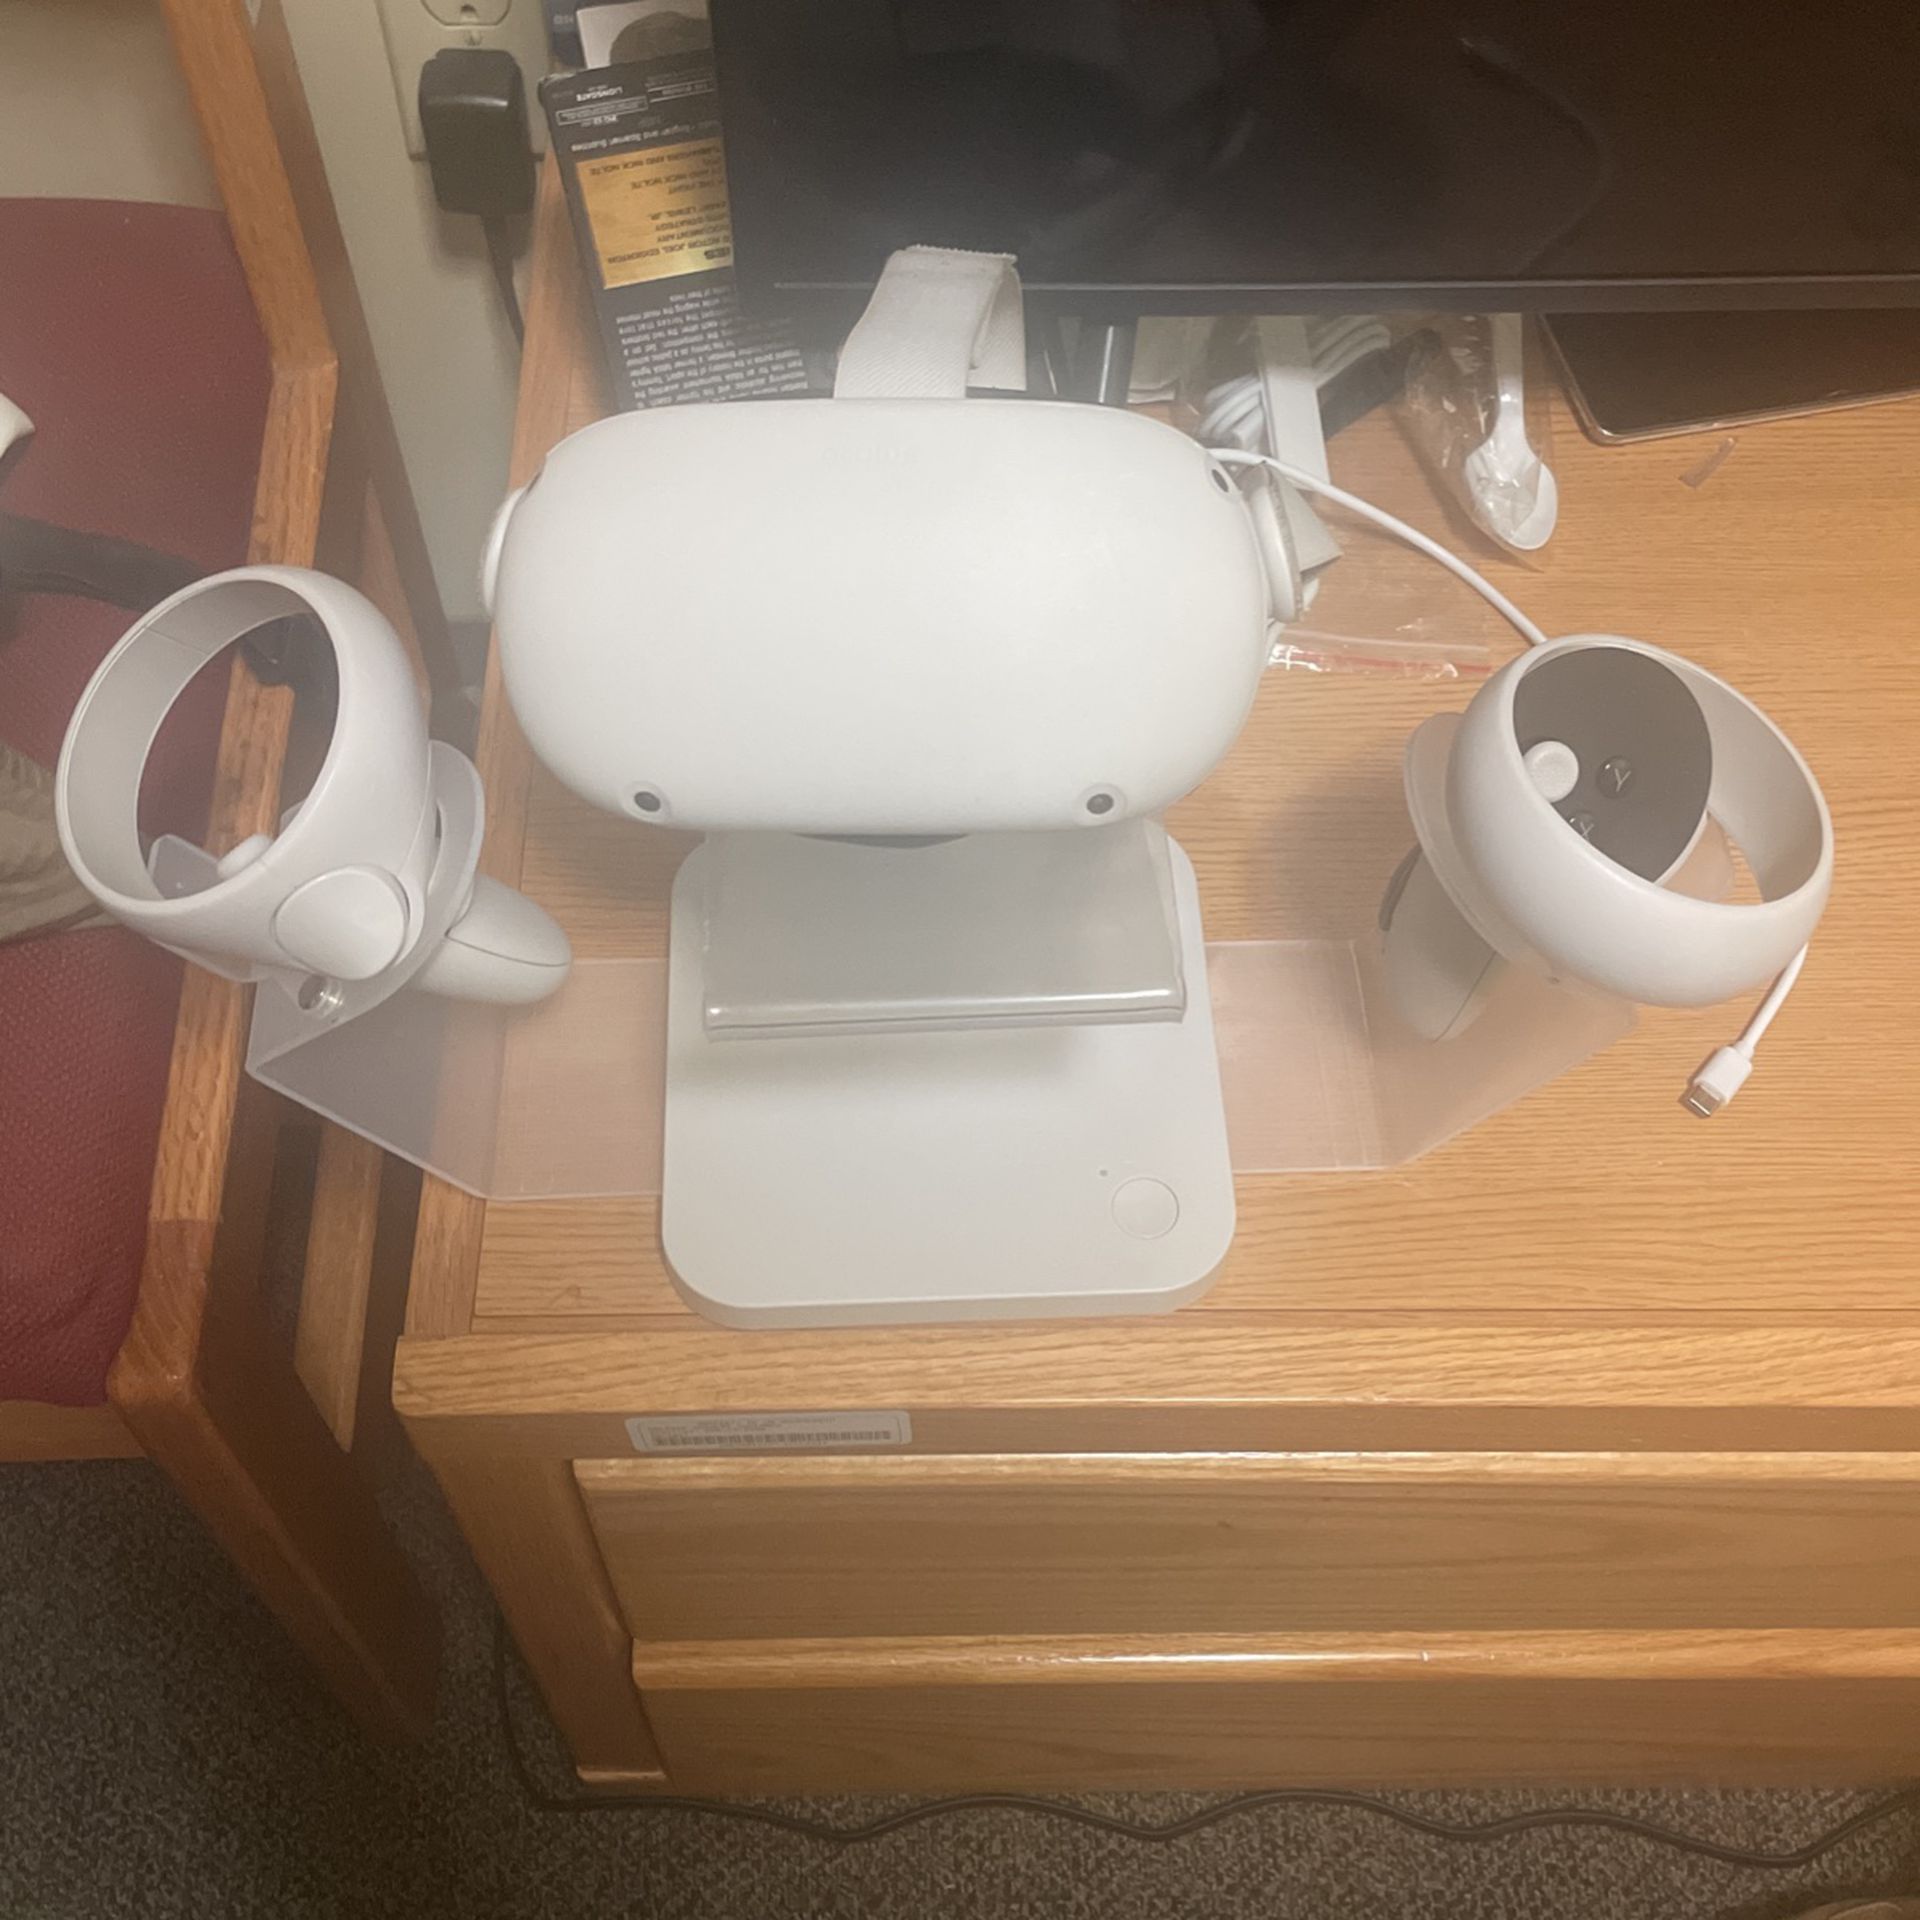 Oculus Quest 2 With Dock. Will Accept Trades . Looking For A 4k Drone Or A Good Camera Phone